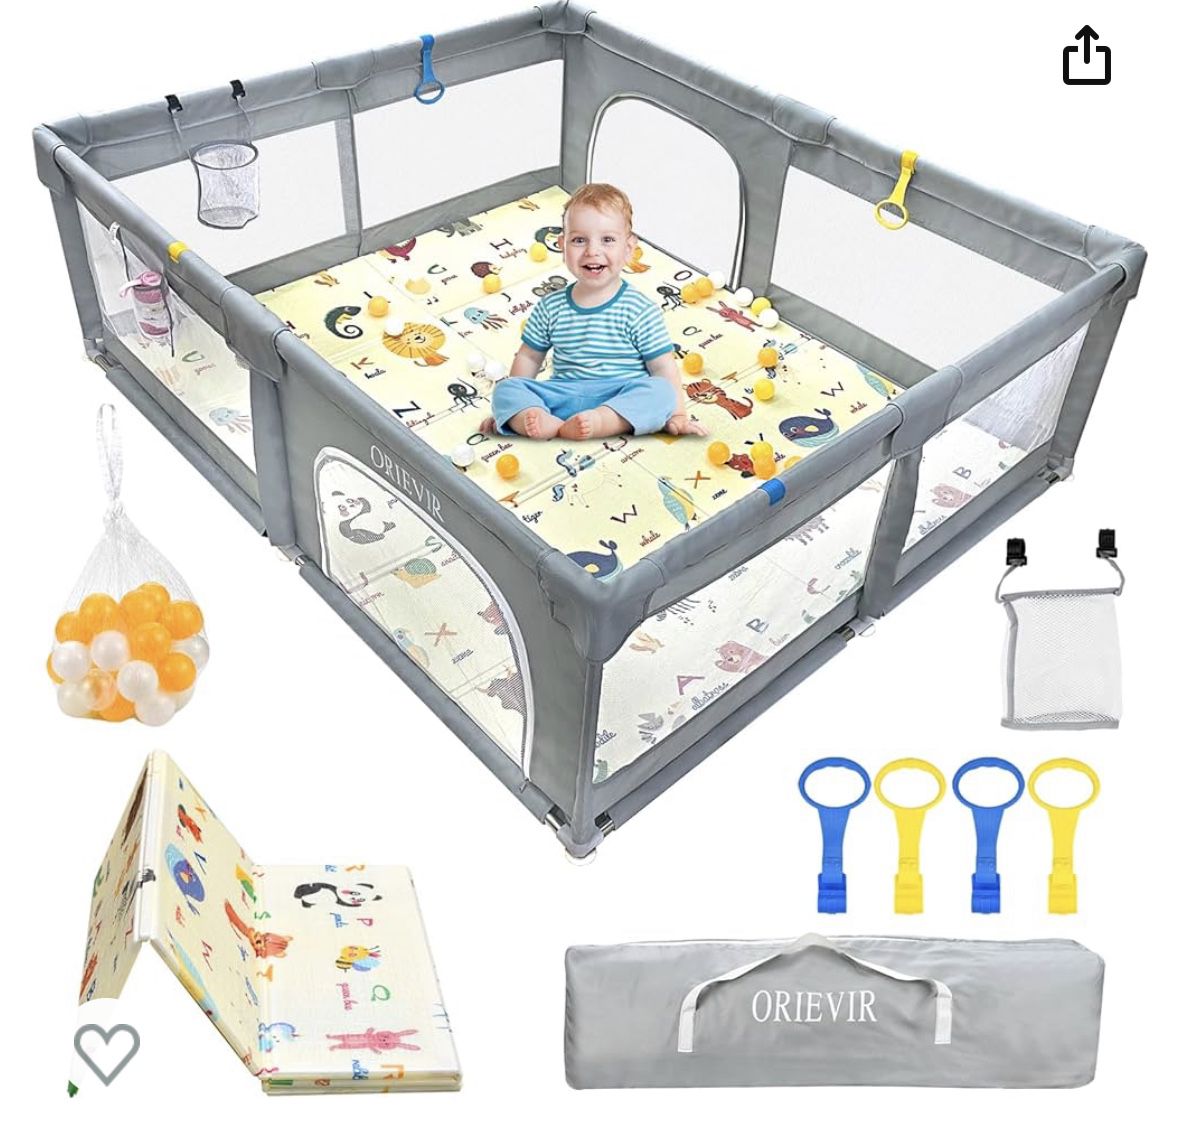 ORIEVIR Baby Playpen,71" X 59"Baby Playpen for Toddler,Baby Playard 300D Cloth,Playpen for Babies with mat,Sturdy Safety Play Yard,Baby Activity Cente